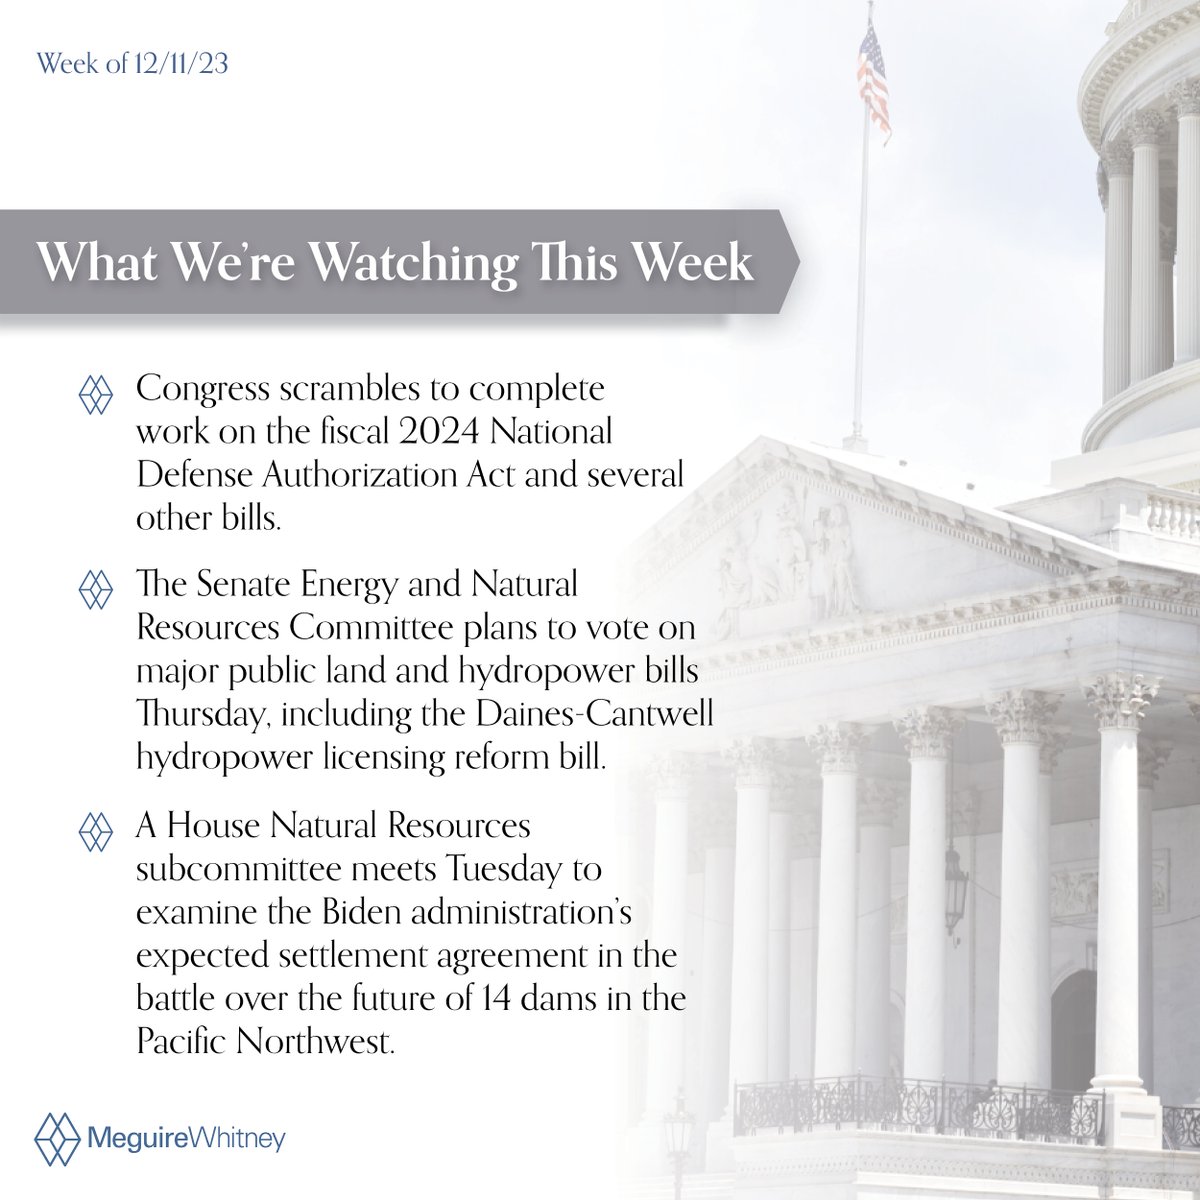 Here is what we're watching on the Hill while Congress prepares for its year-end legislative scramble. #MeguireWhitney #EnergyandCommerce #Congress